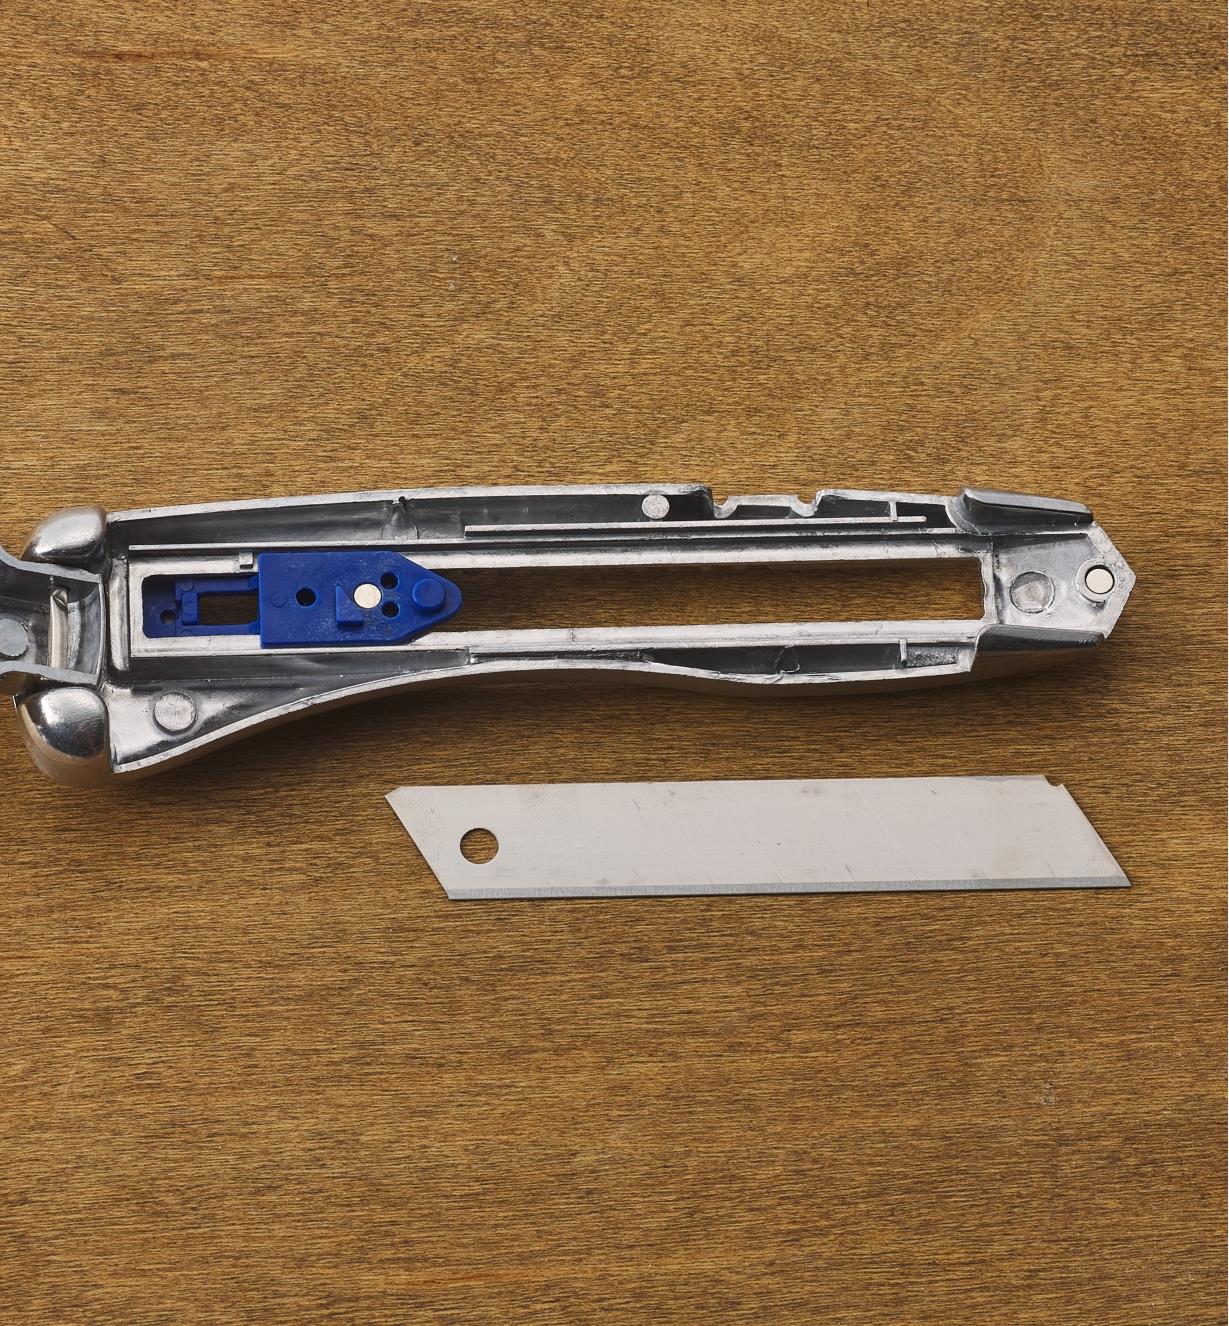 The Delphin snap-off blade knife opened with the blade removed to show the internal mechanism